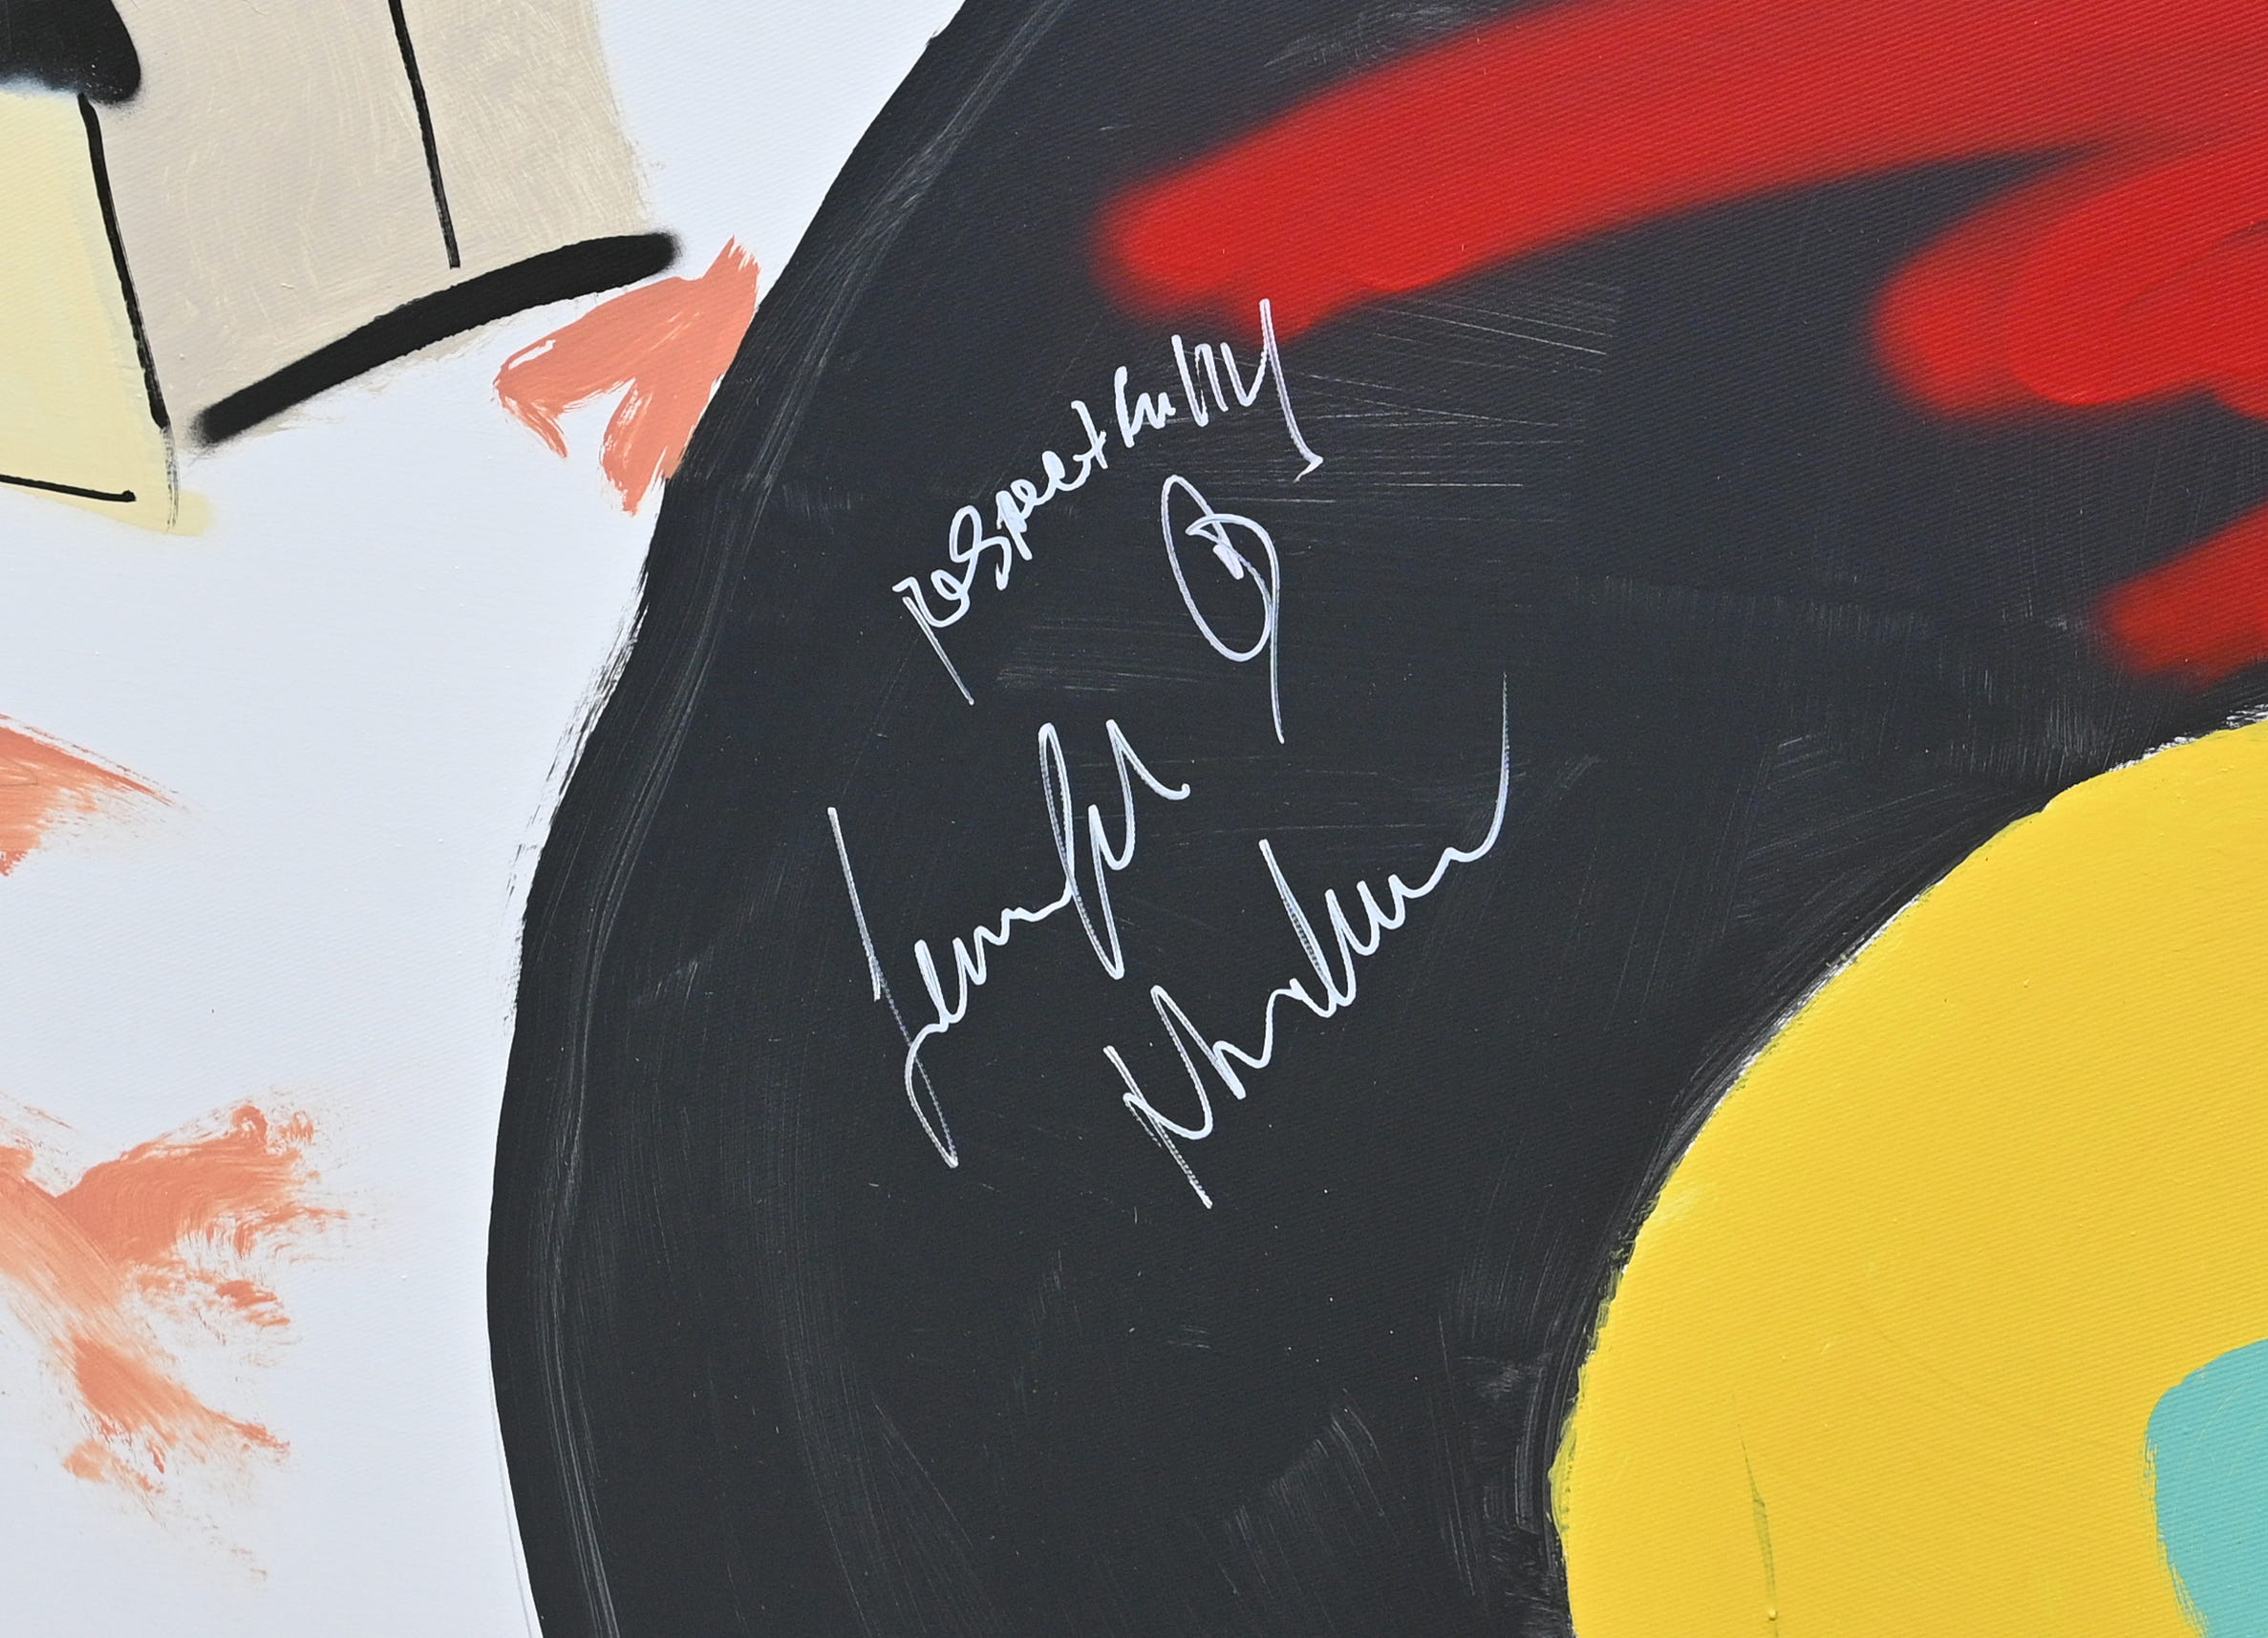 Actor Jennifer Hudson's autograph on the mural by artist Desiree Kelly outside the Charles H. Wright Museum in  Detroit on Sunday, August 1, 2021 during a conversation for the film "Respect," in which Hudson plays Aretha Franklin.